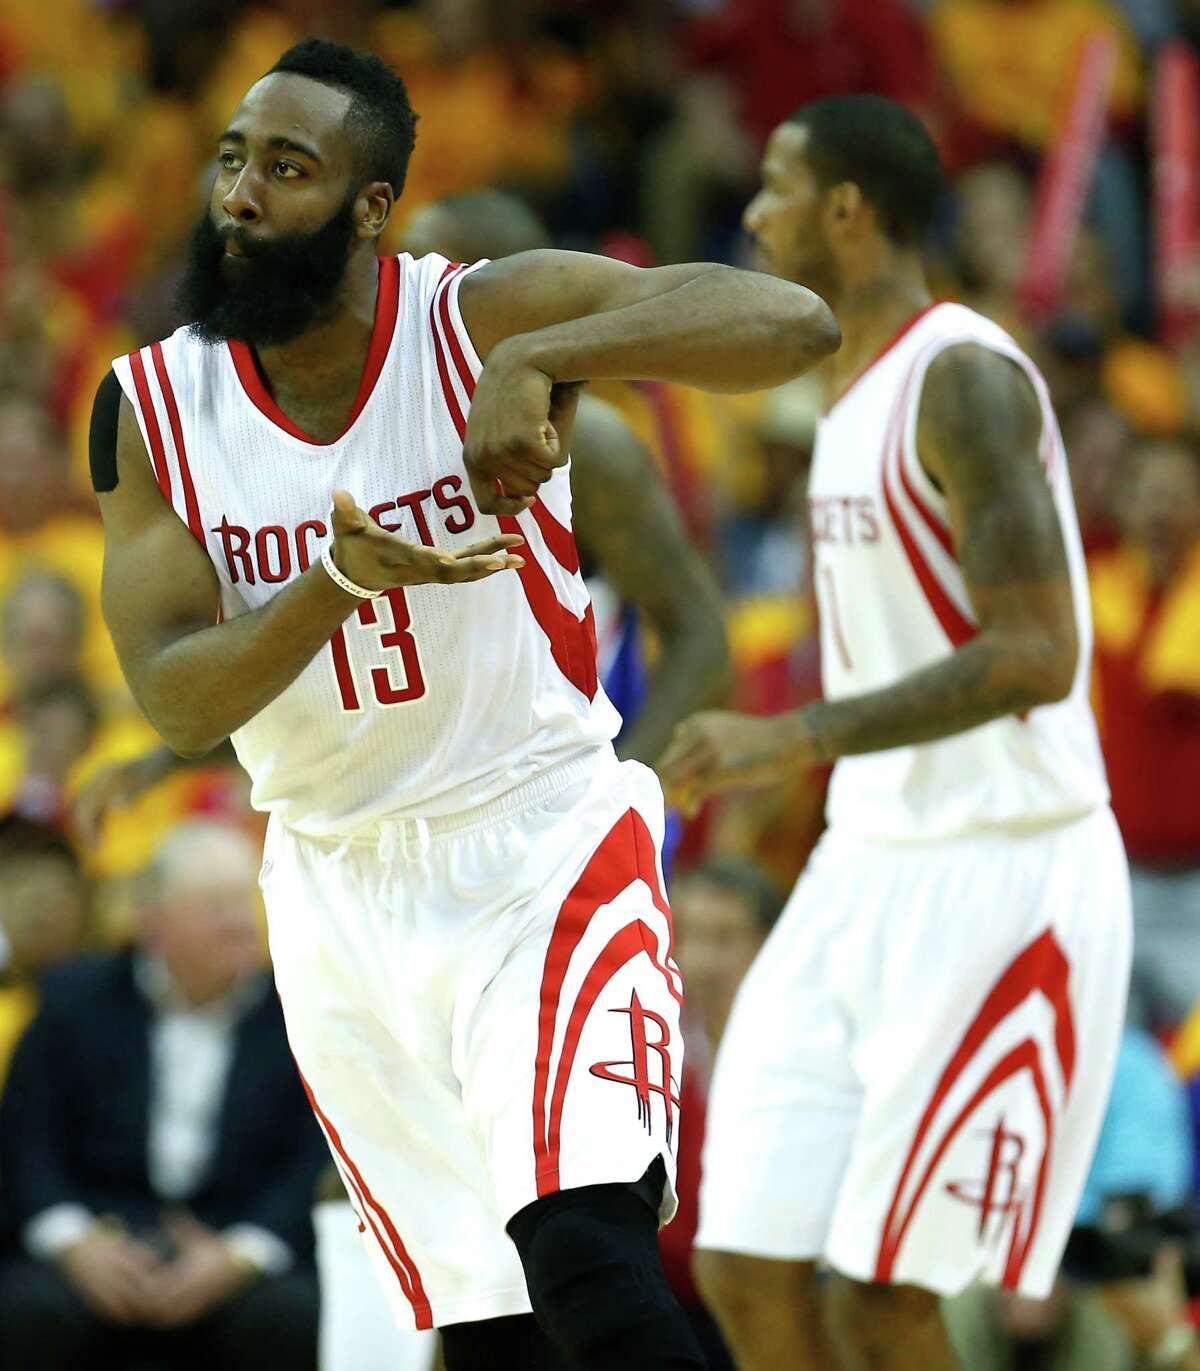 James Harden won't reveal the meaning behind his "stirring the pot" gesture, but it's nationally known.